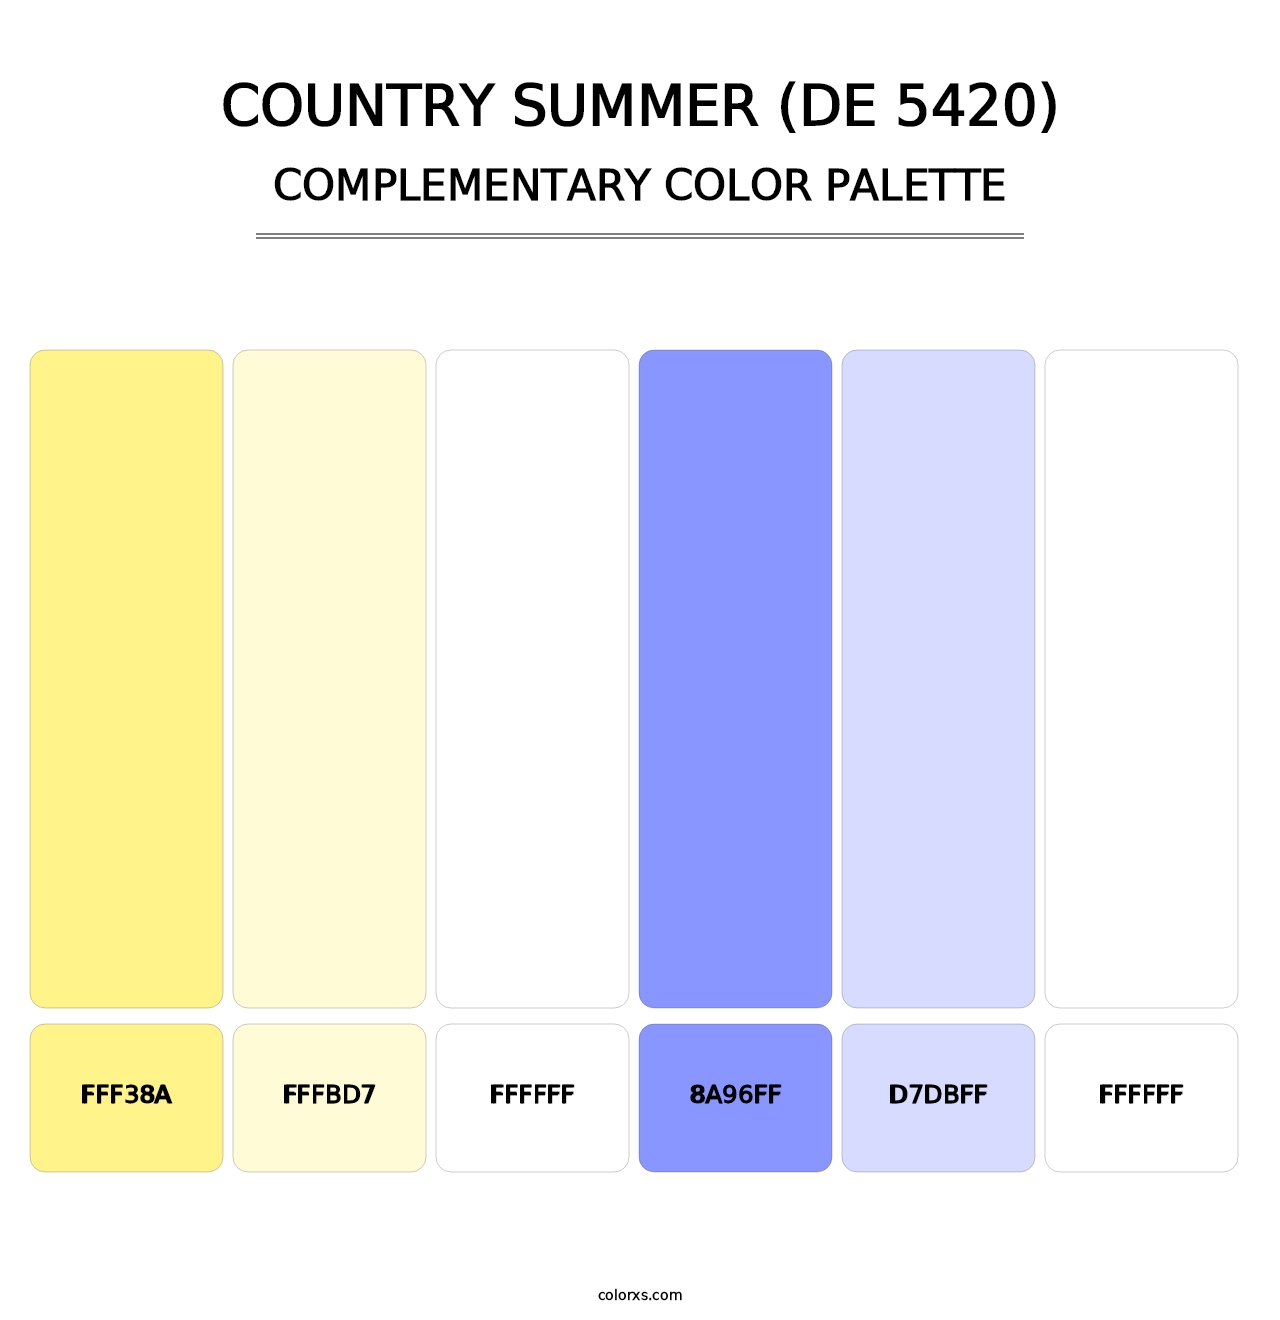 Country Summer (DE 5420) - Complementary Color Palette